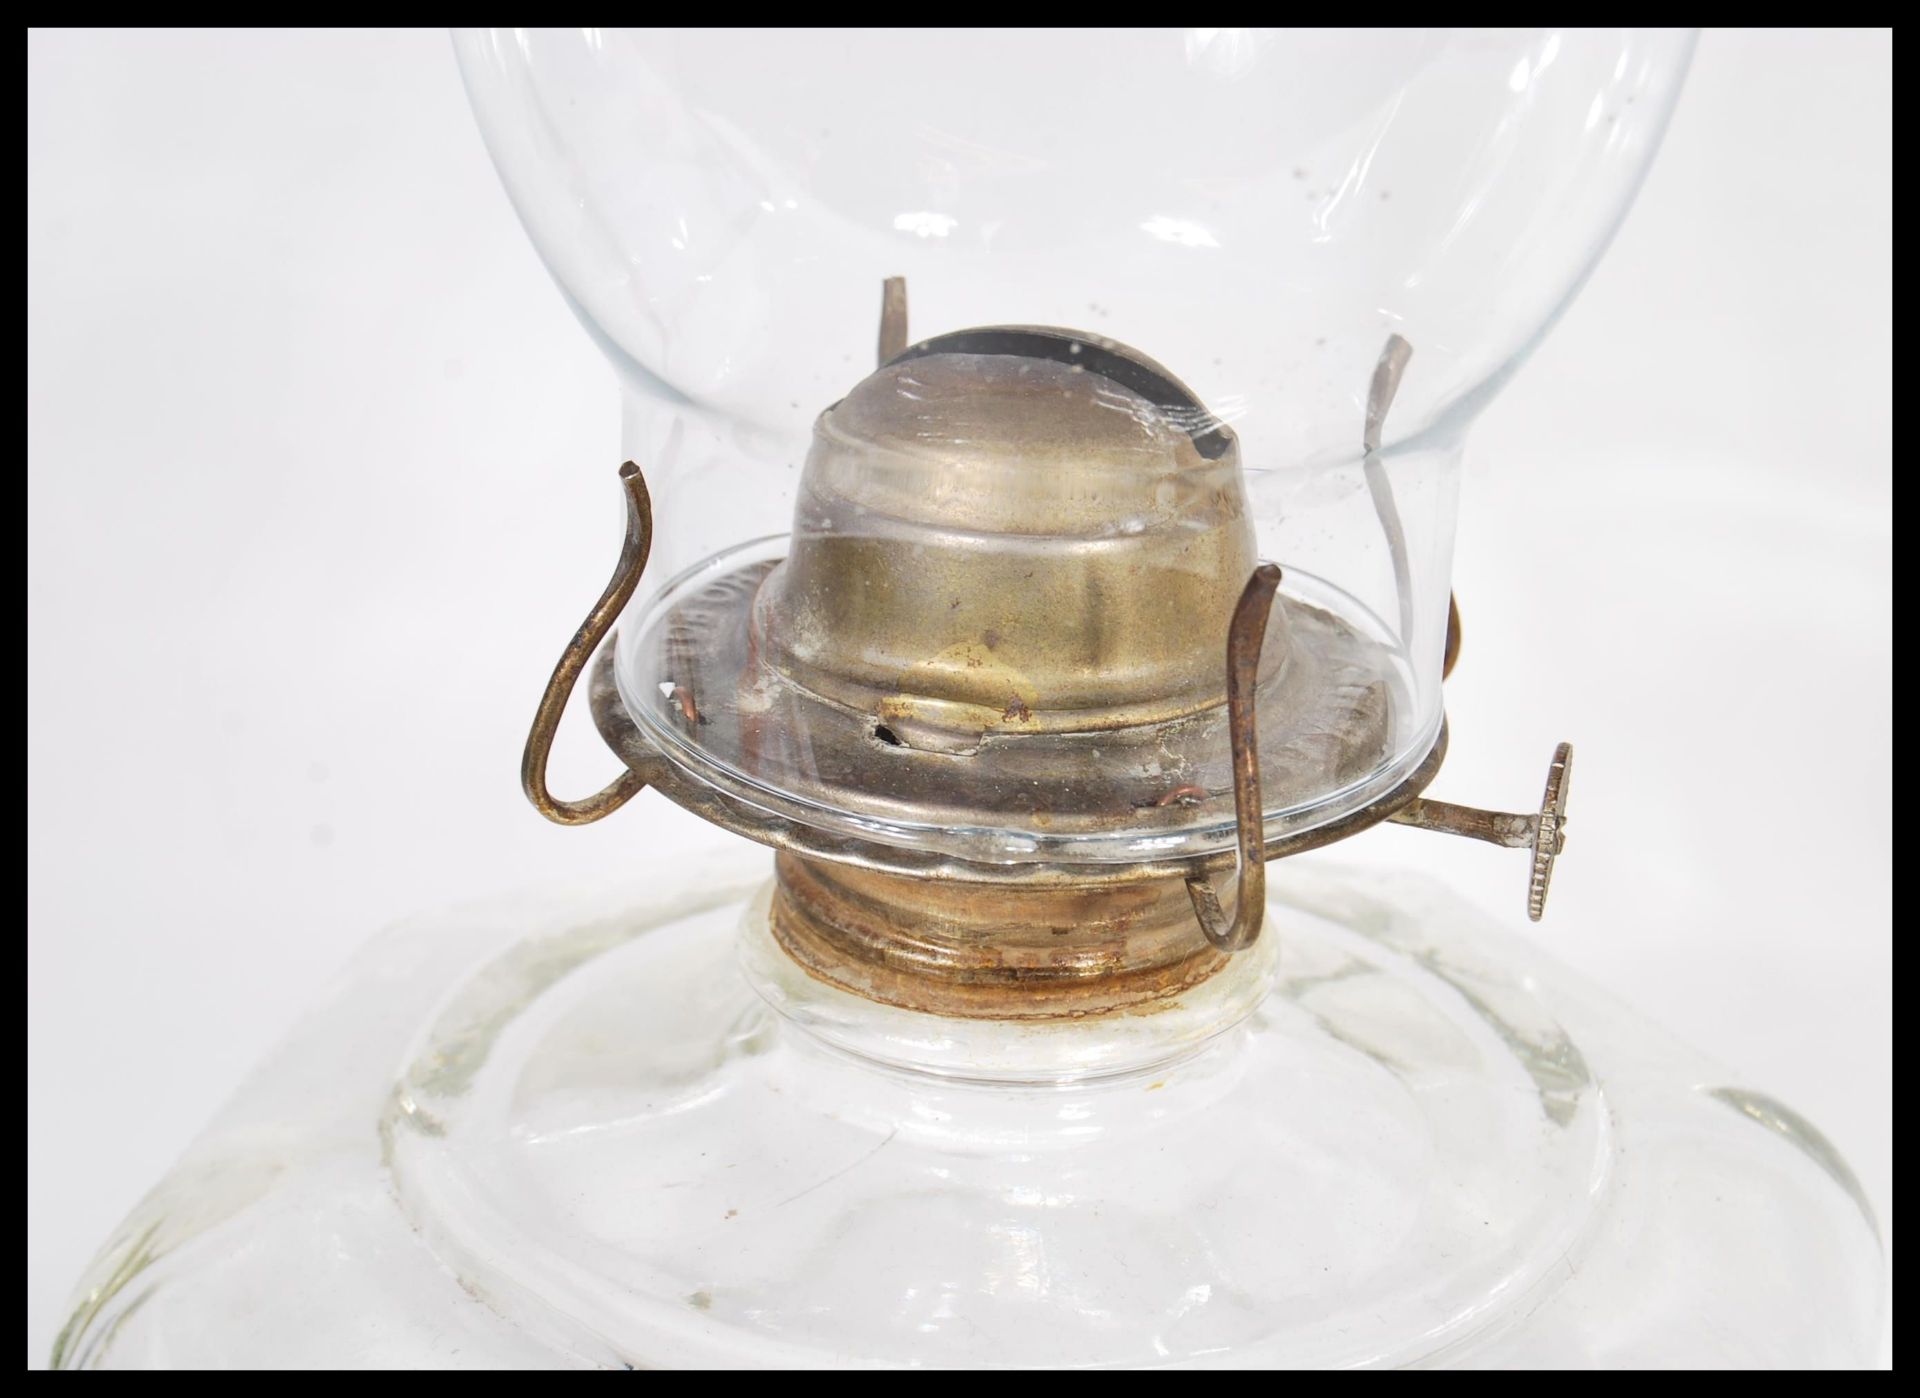 An late 19th / early 20th Century oil lamp having a clear glass and brass fittings with a flu - Bild 3 aus 4